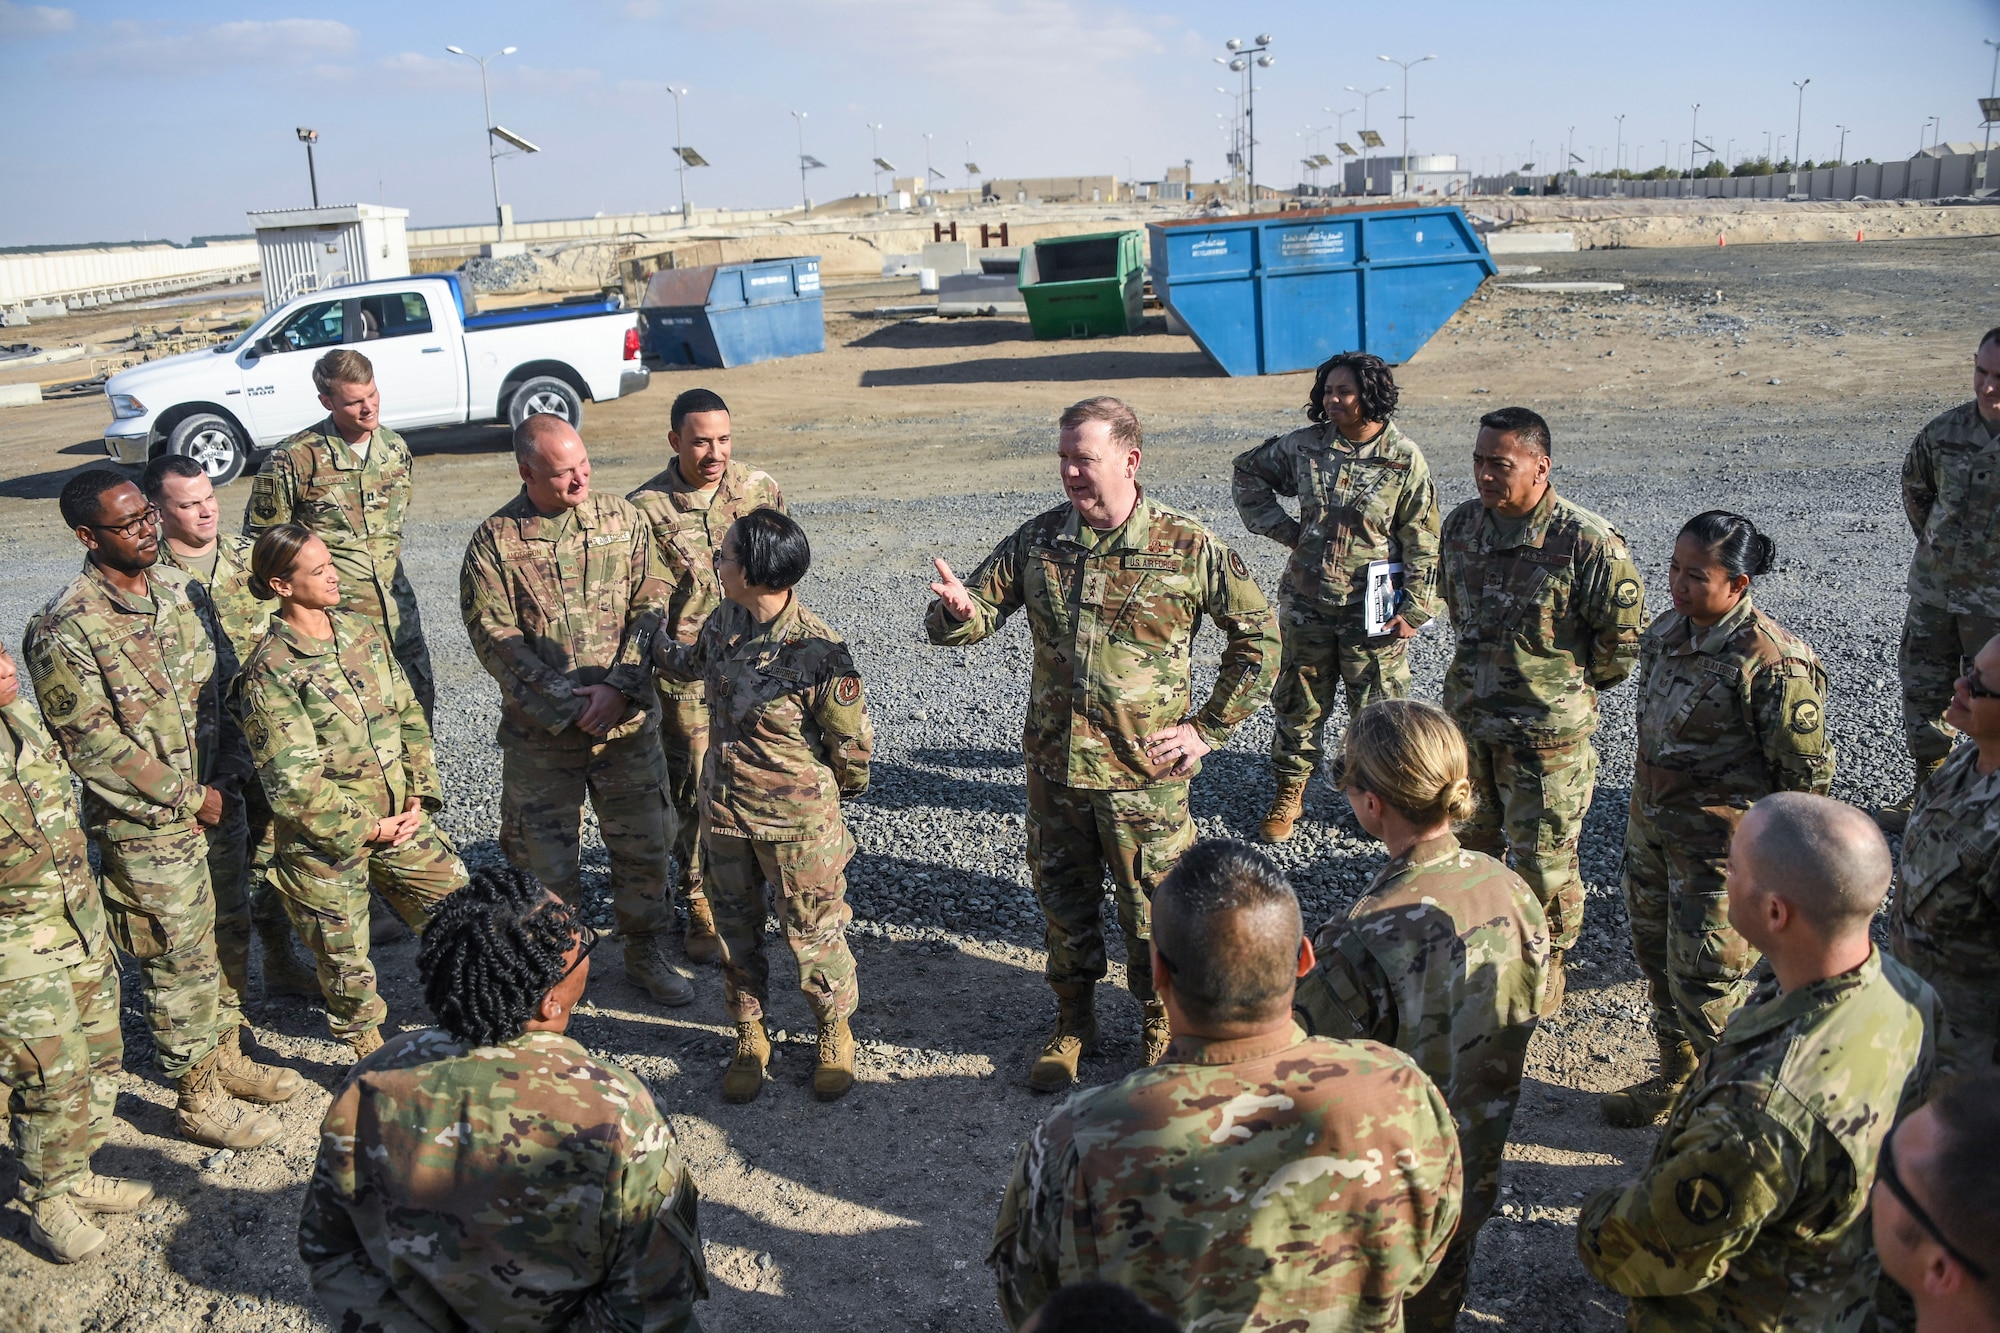 U.S. Air Force Lt. Gen. Richard Scobee, commander of Air Force Reserve Command, speaks to 380th Expeditionary Logistics Readiness Squadron Airmen during his visit to Al Dhafra Air Base, United Arab Emirates, Feb. 13, 2019.